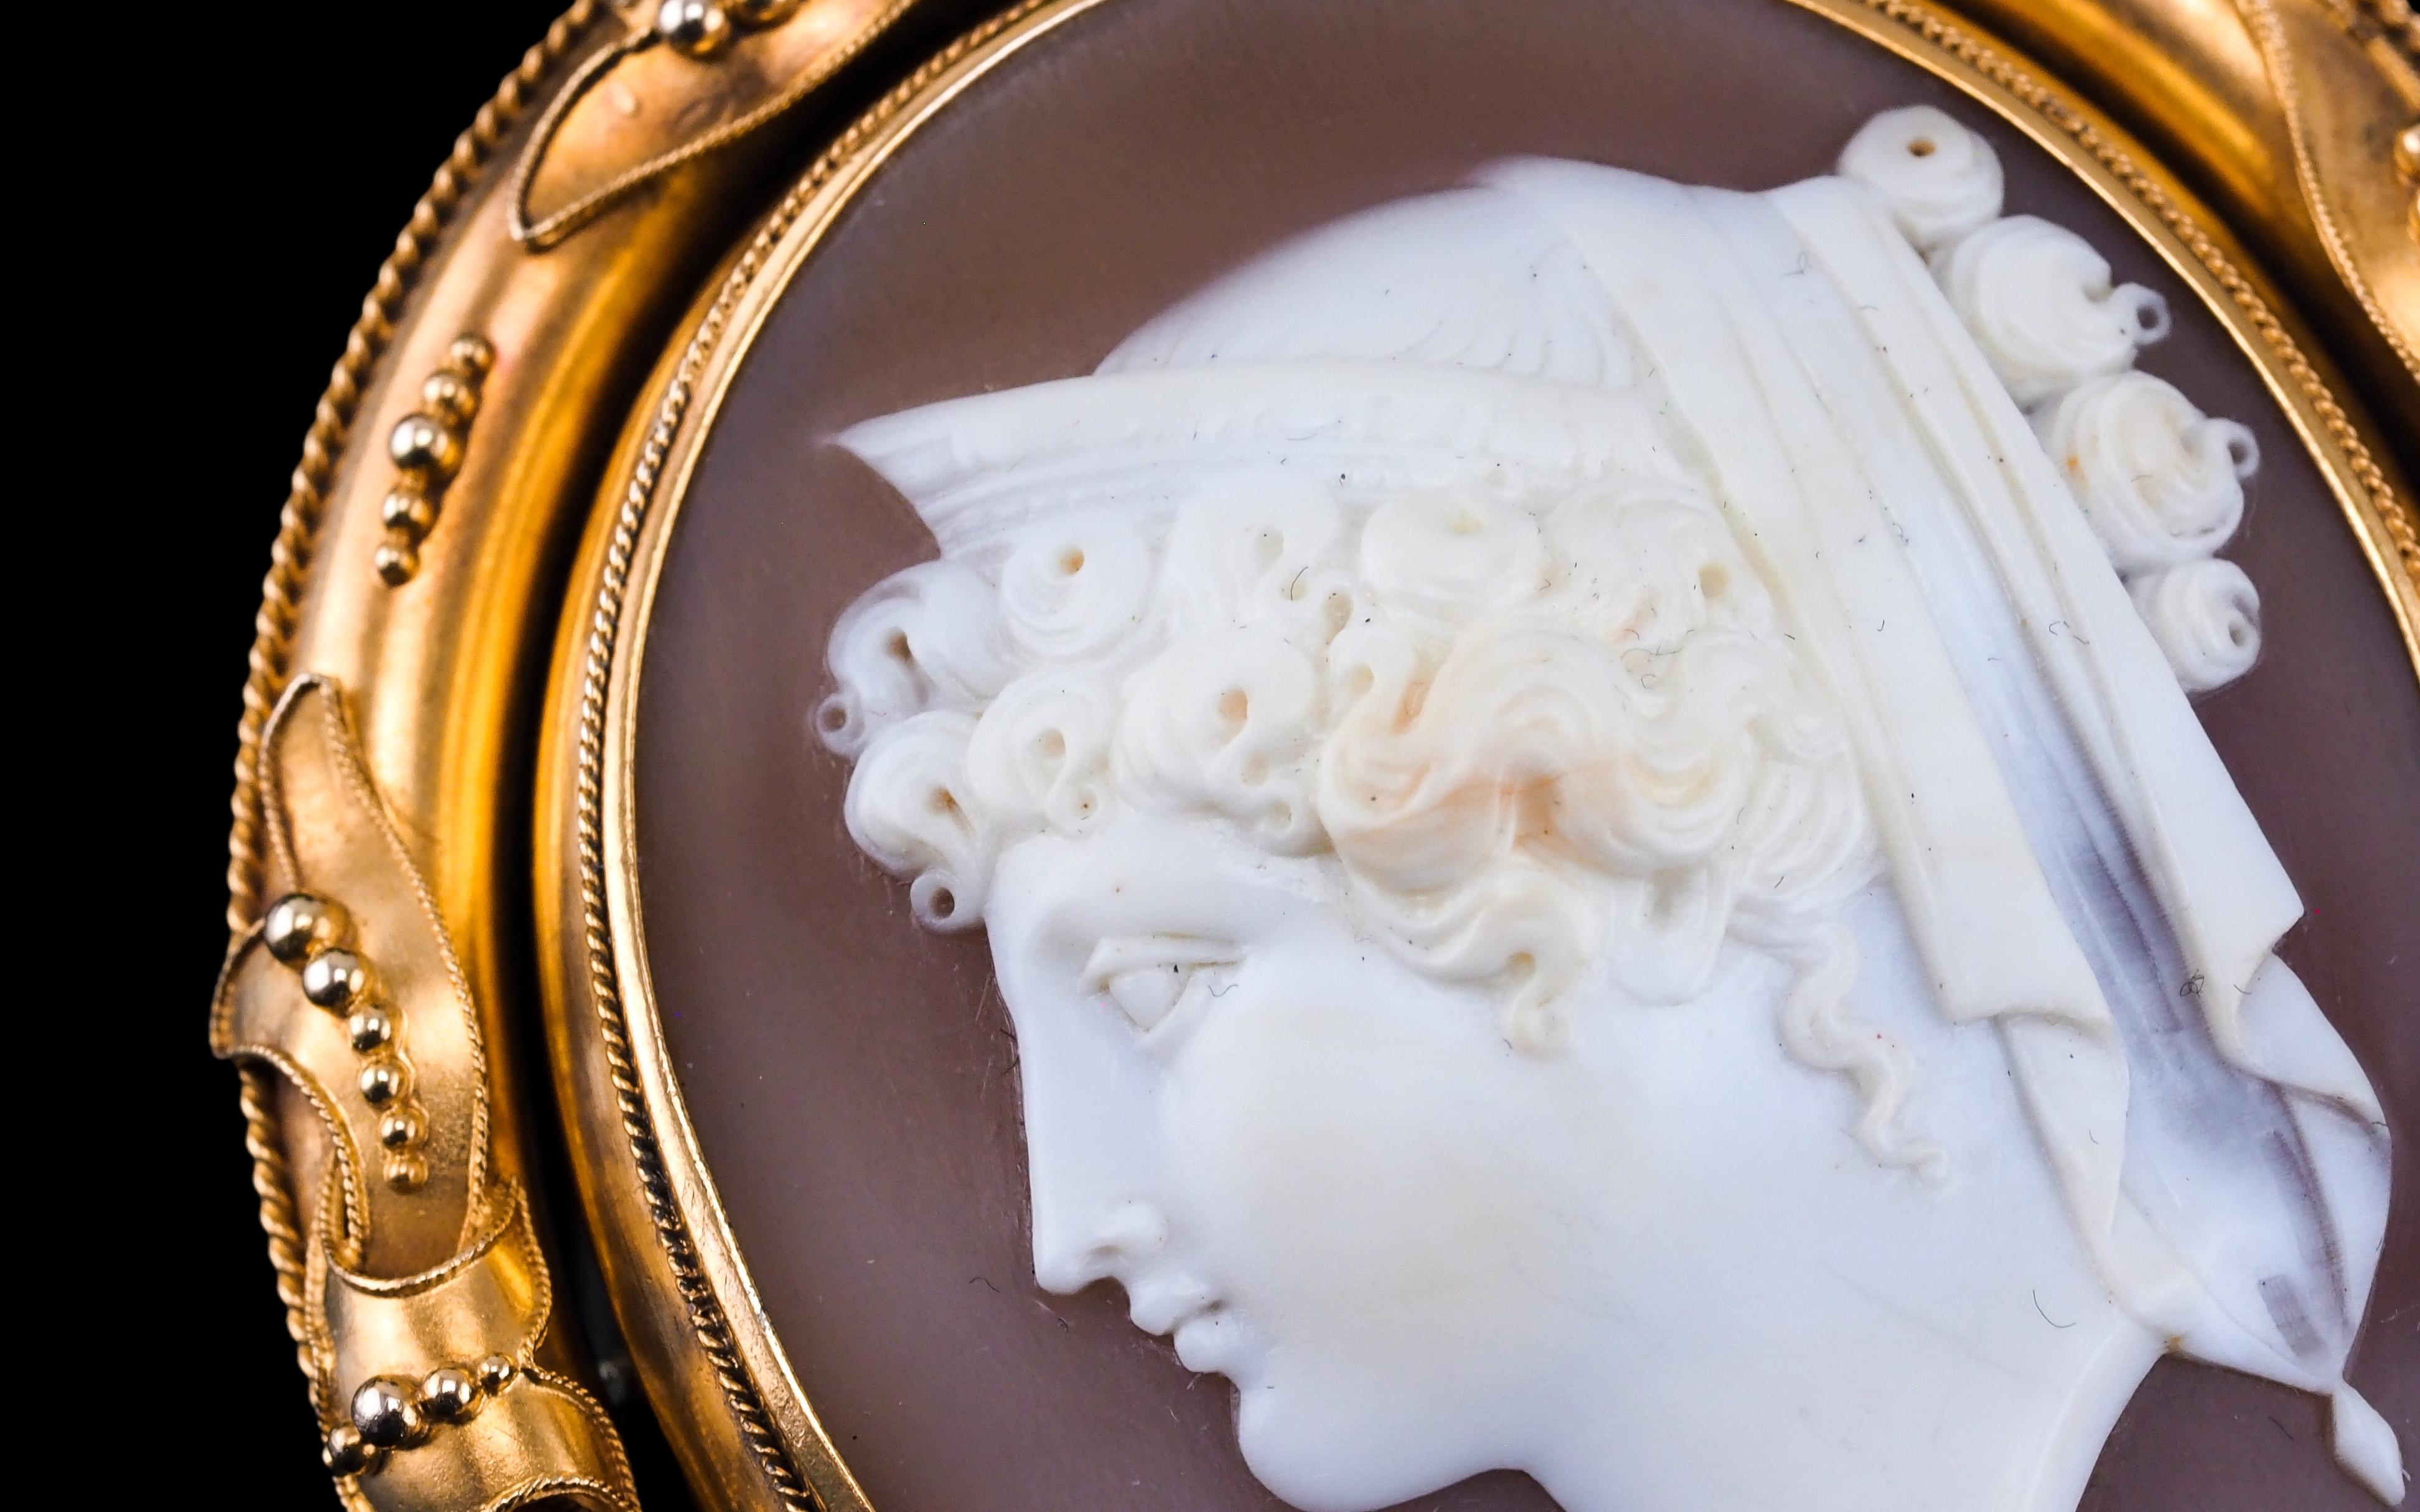 Antique Cameo Brooch Pendant Necklace 18K Gold - Victorian c.1860 For Sale 3